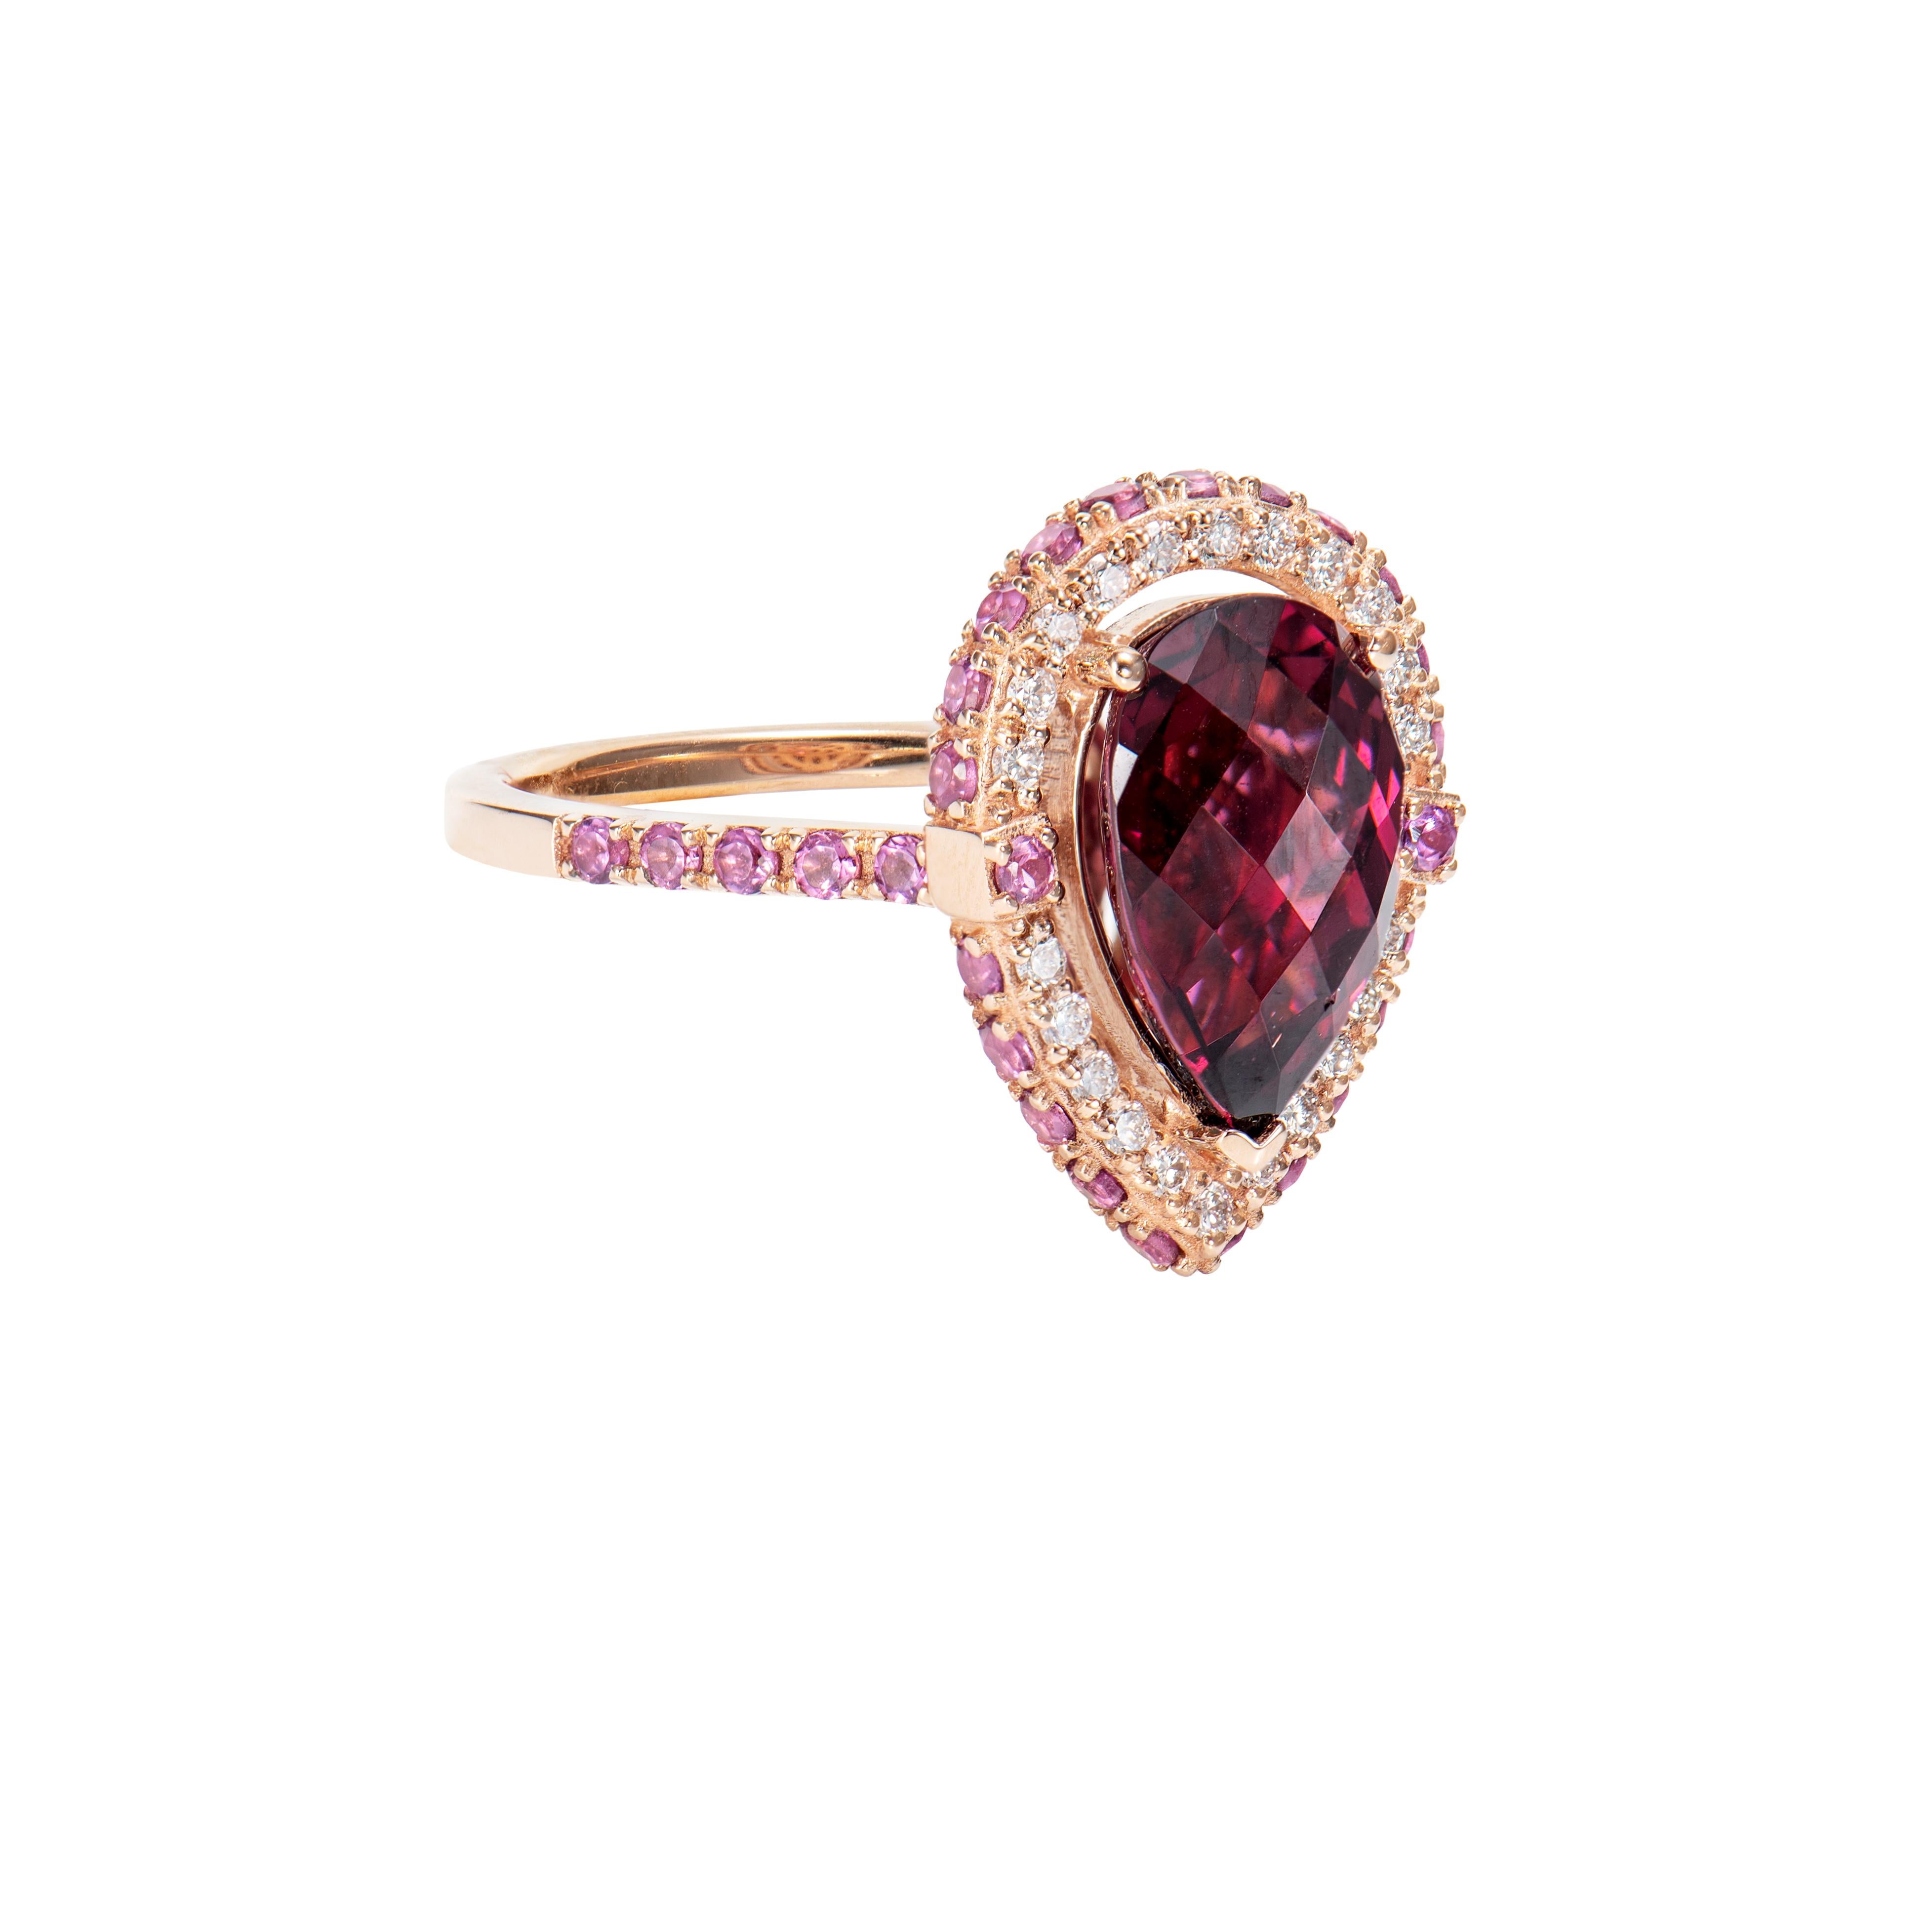 Celebrating Magenta as the color of the year for 2023, we present our exclusive Radiating Rhodolite collection. The magnificent magenta hues in these gems are brought to life in a classic rose gold setting with white diamonds.

Rhodolite and Diamond